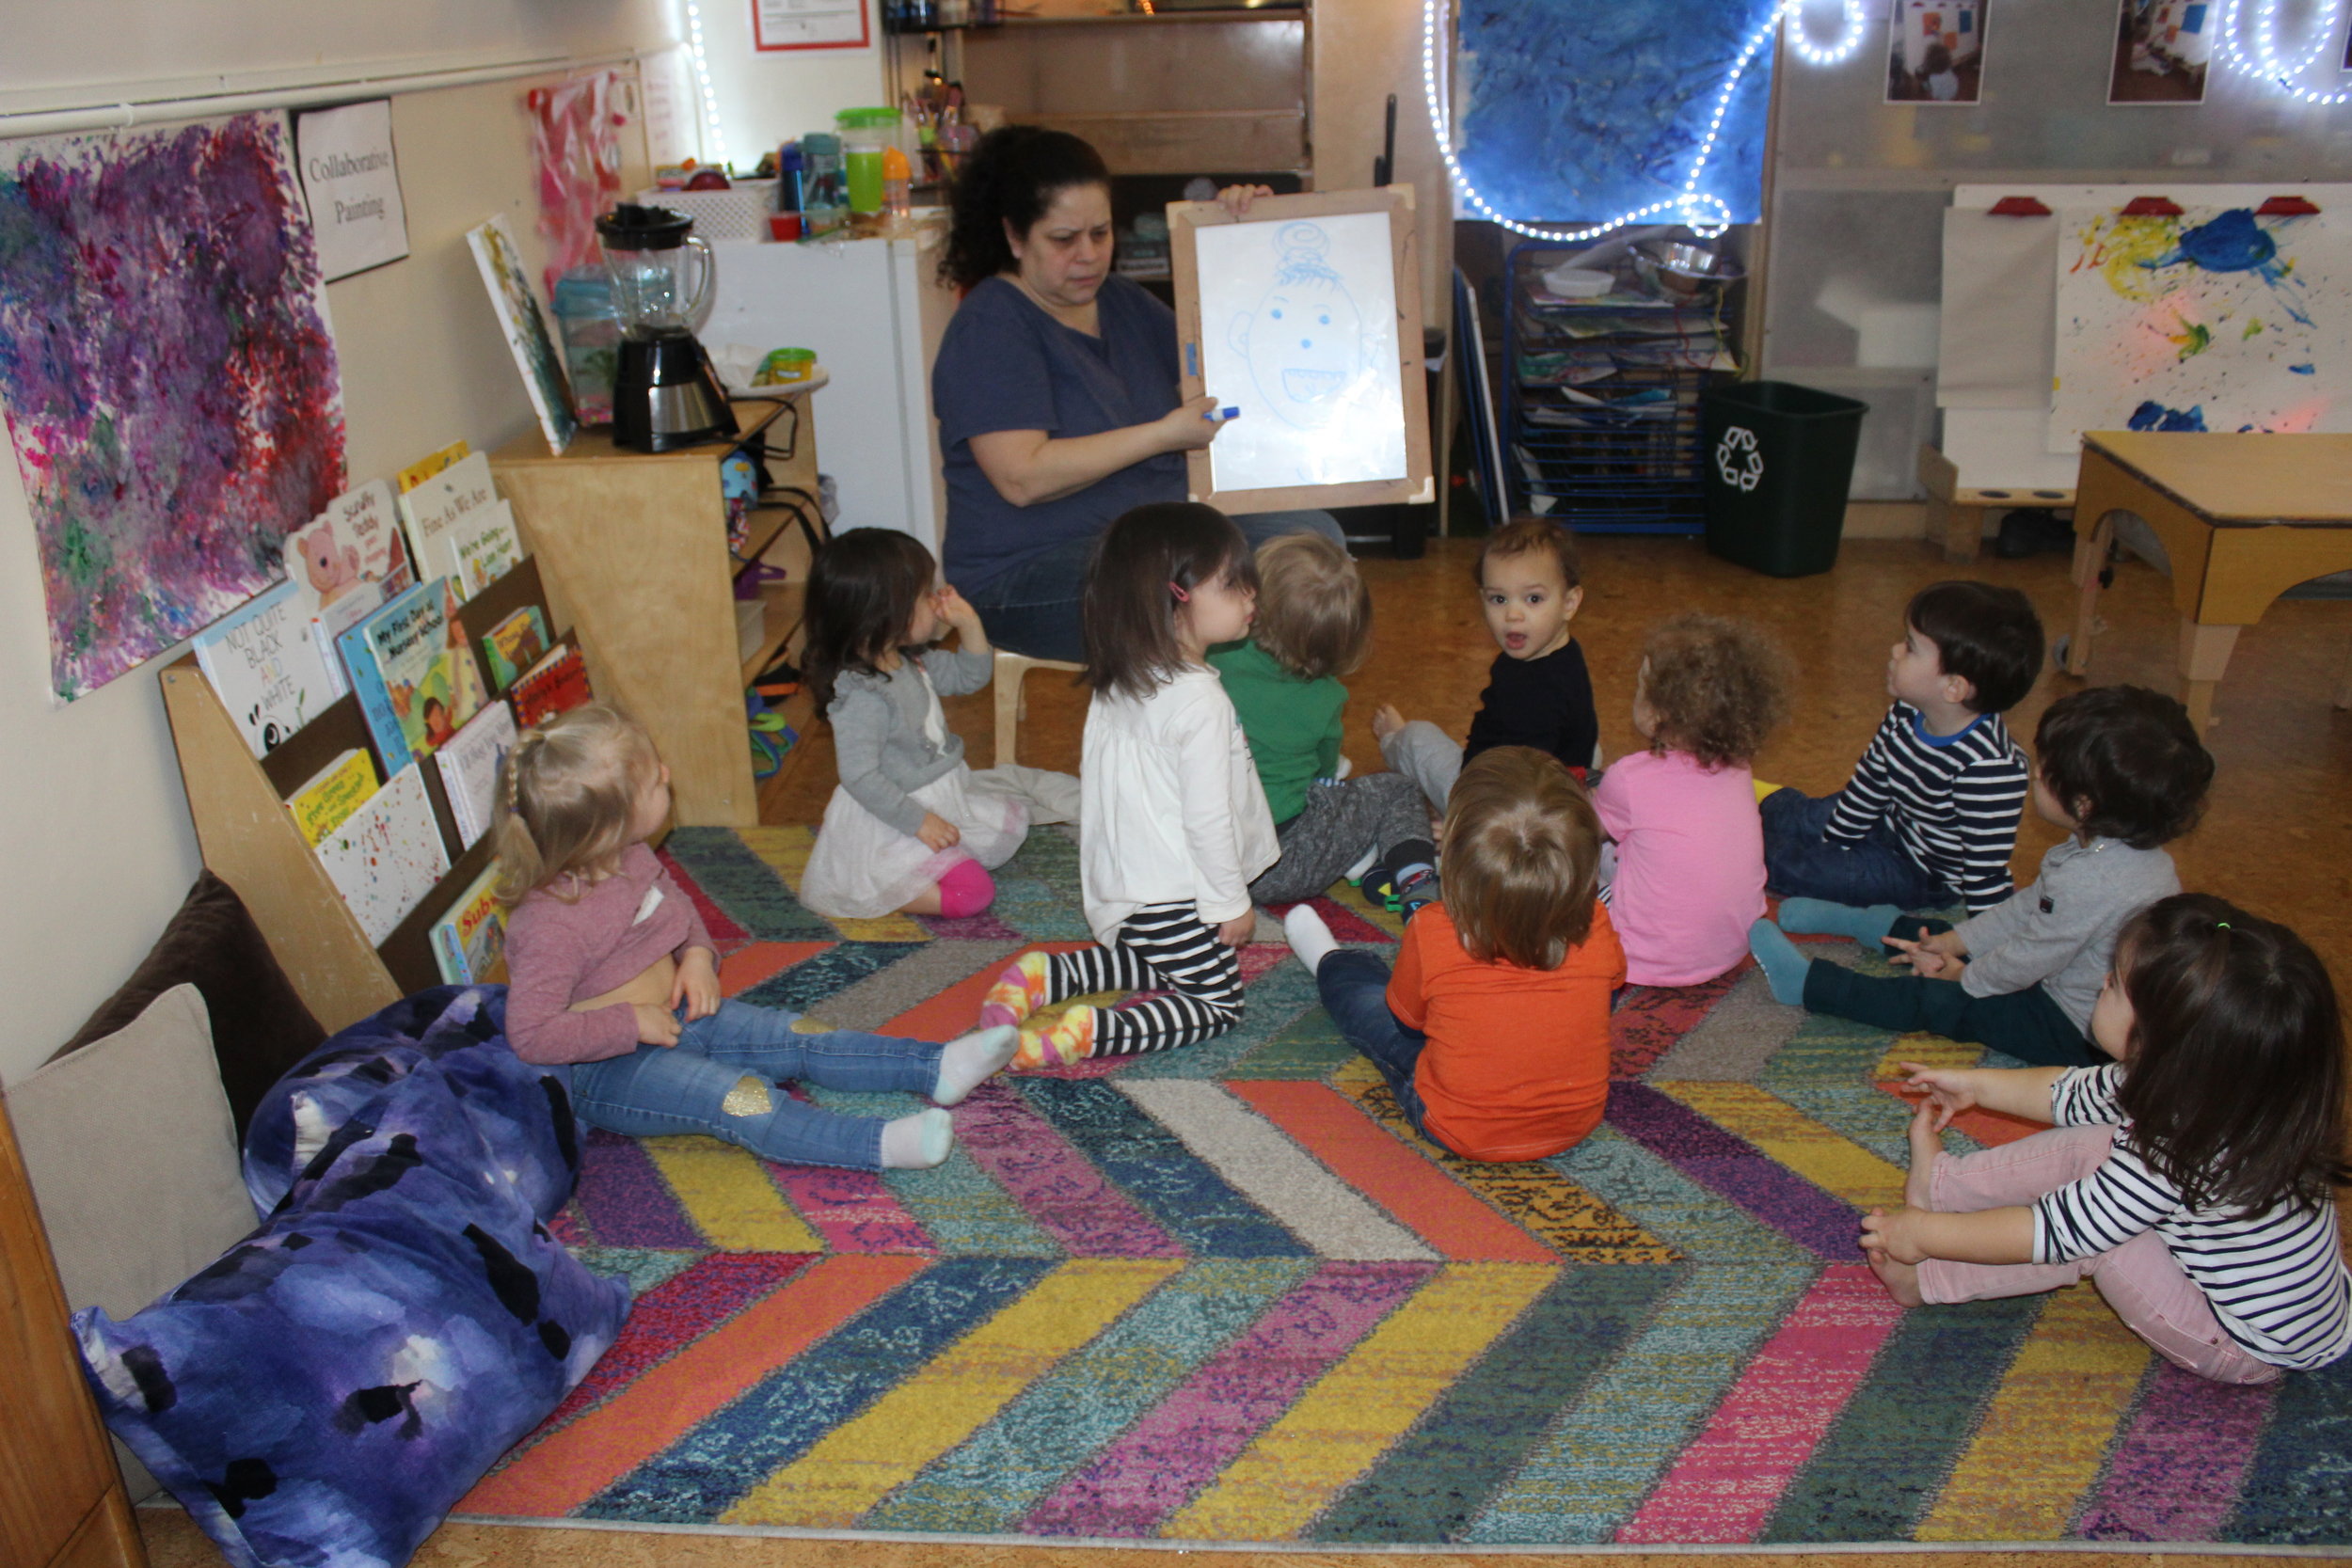  During circle time, Ms. Janet drew a self-portrait of Ms. Sandra.&nbsp; She asked the children, What is Sandra missing?&nbsp; All the children participated and articulated the different features until the self-portrait was completed.&nbsp; I don't s